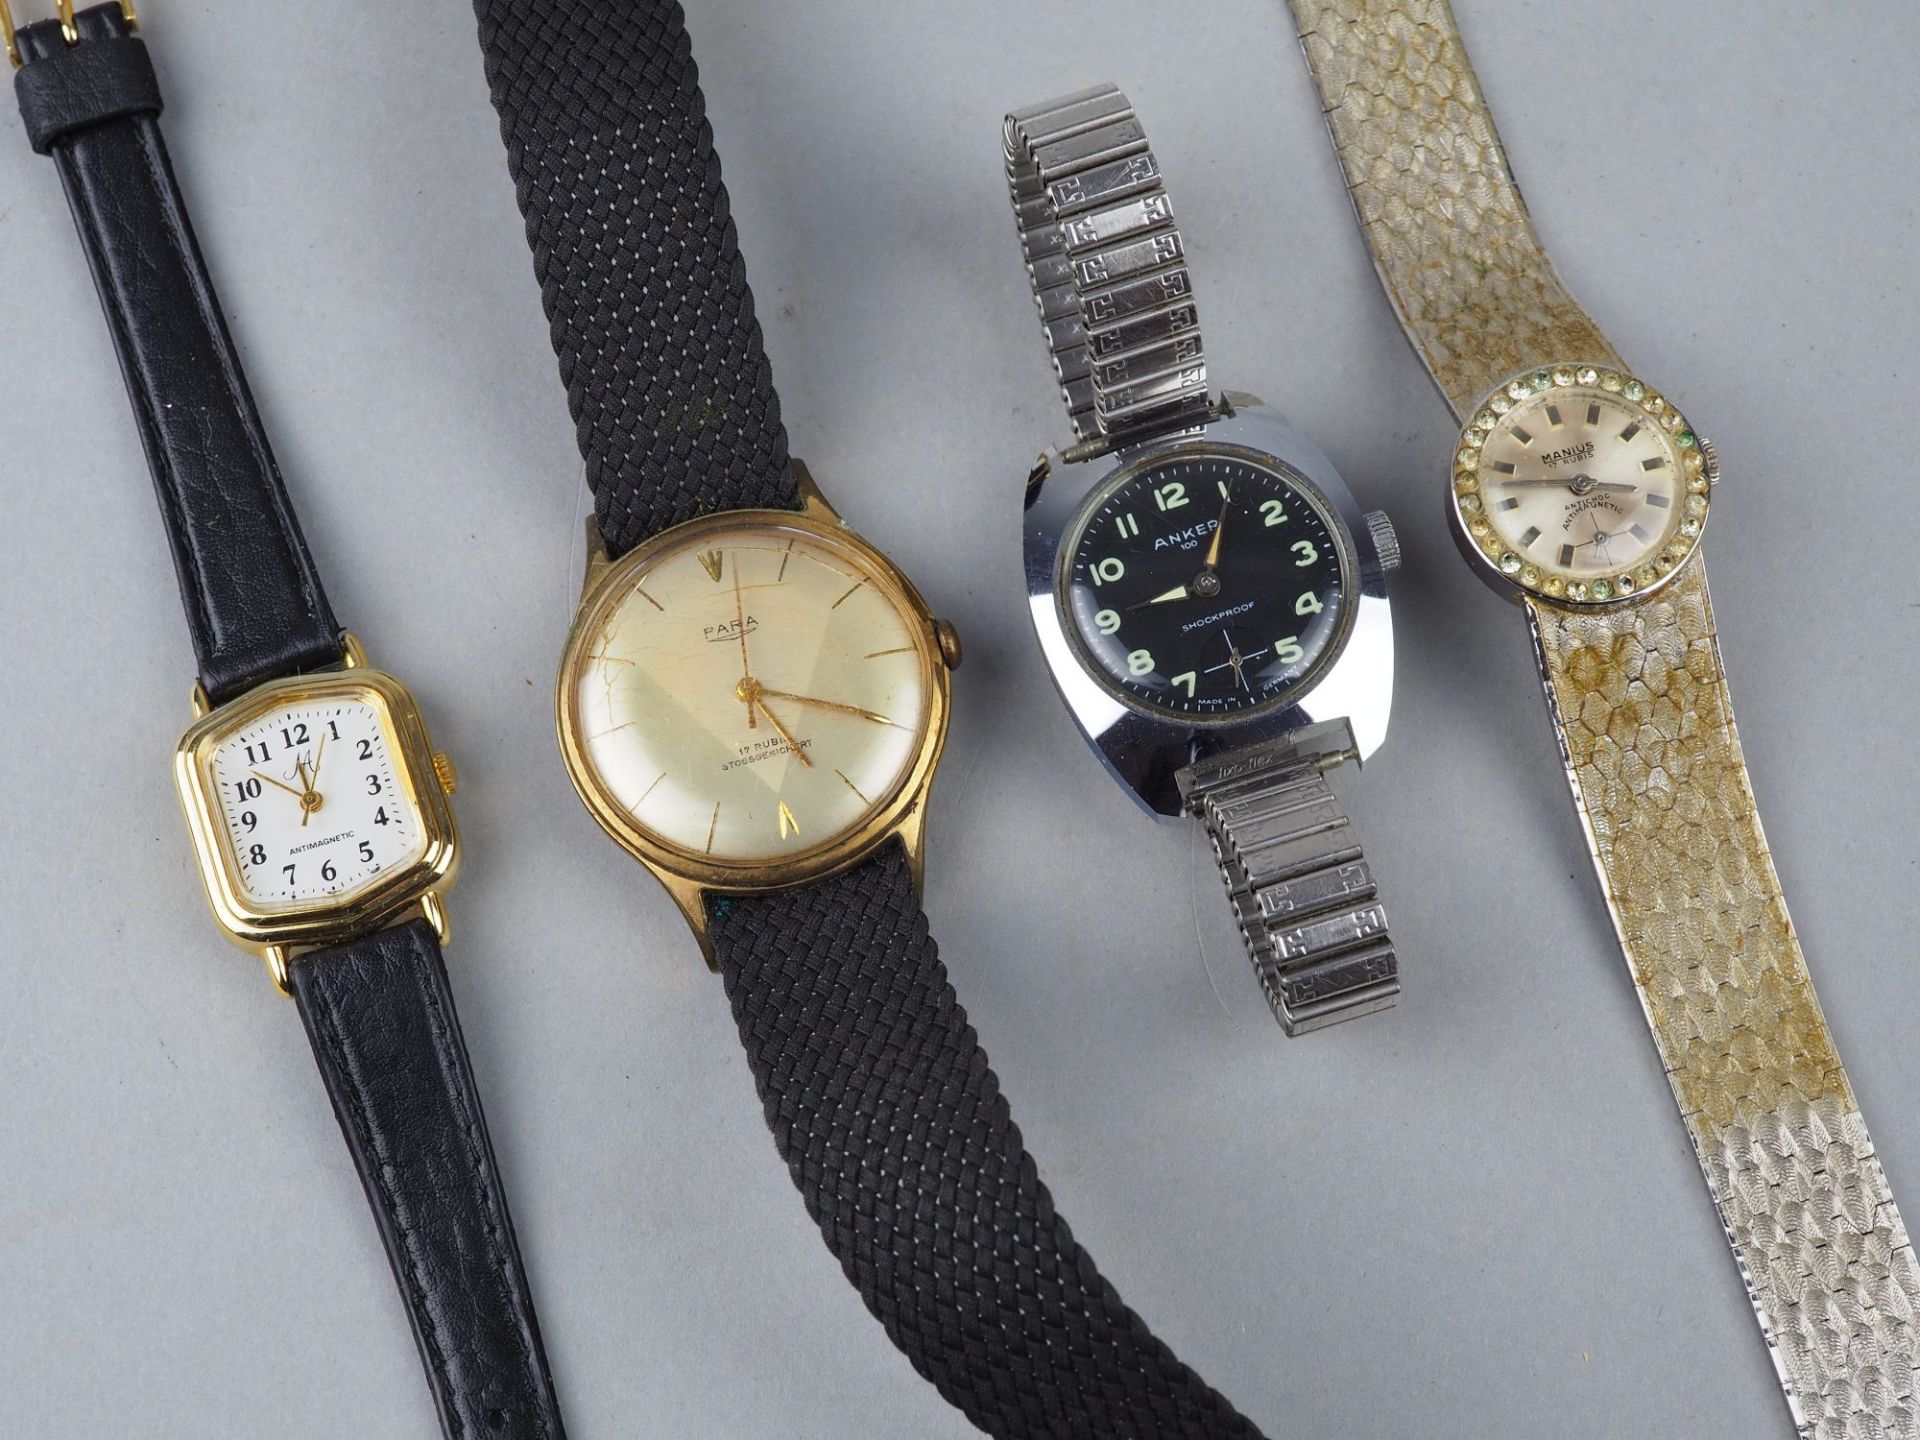 Convolute vintage wristwatches, 20th c. - Image 2 of 2